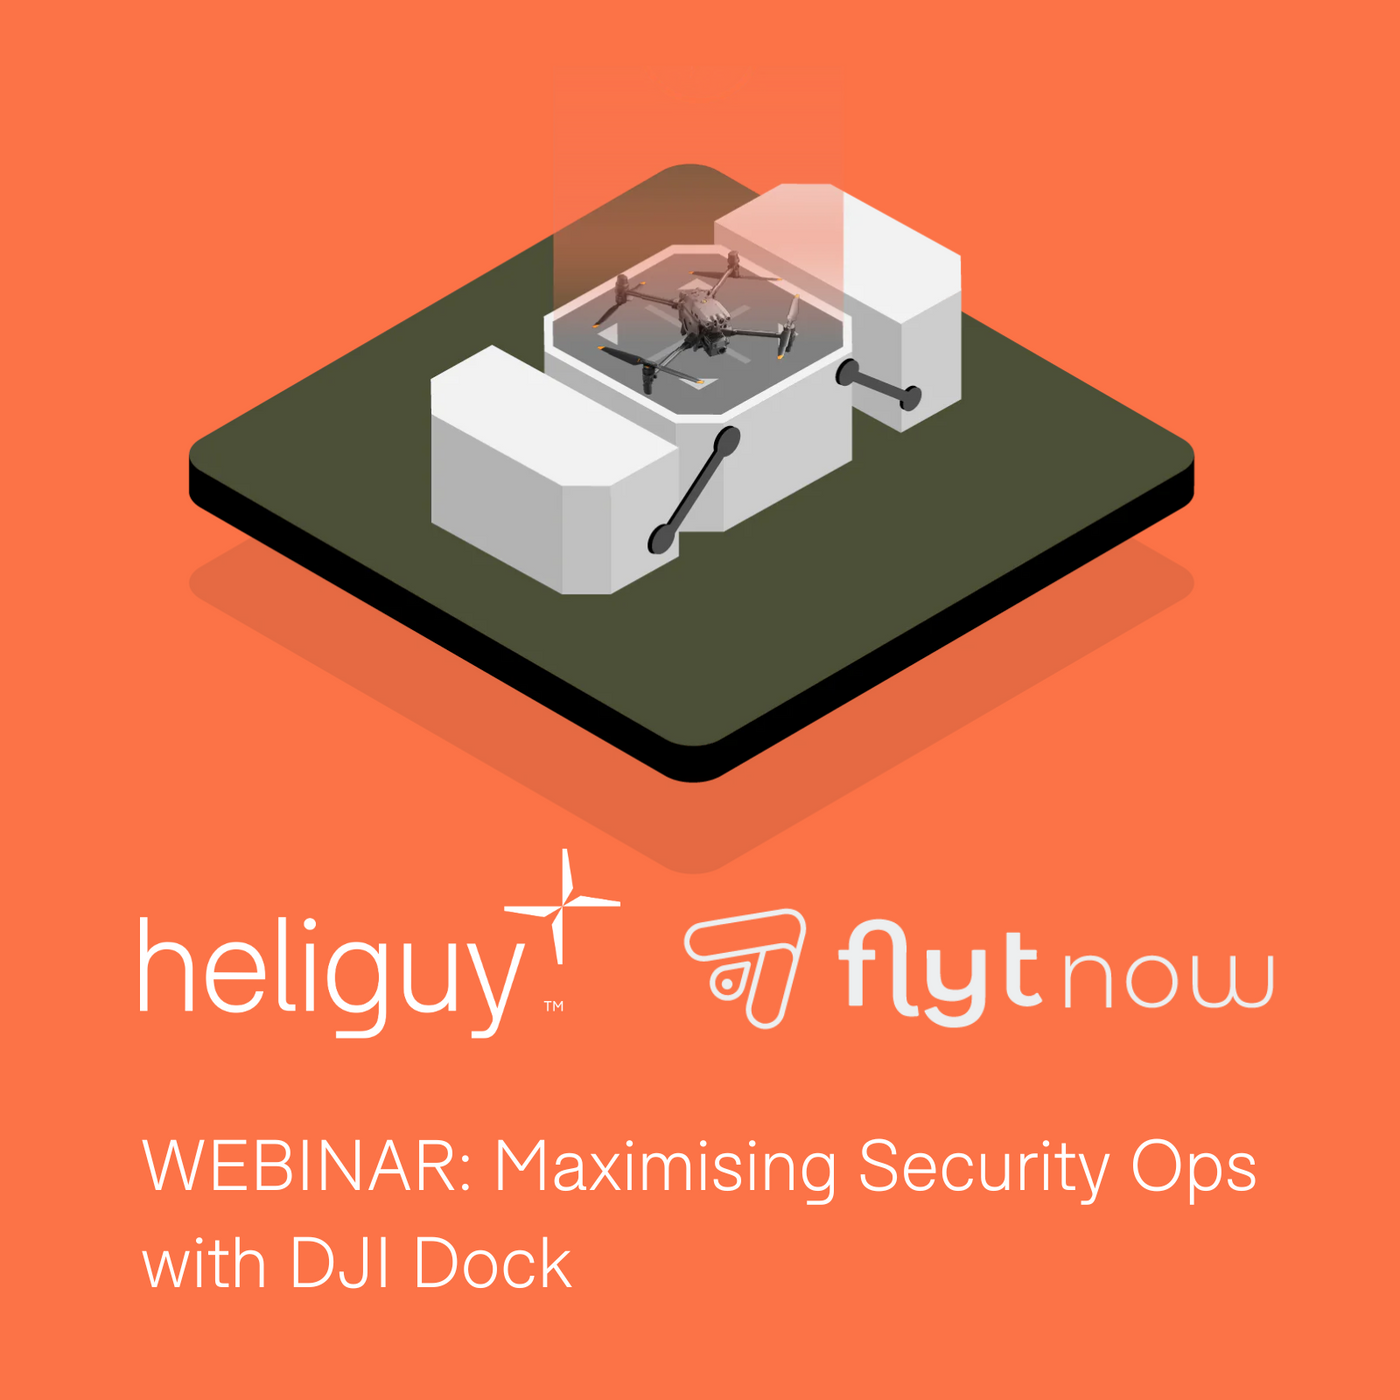 Webinar: DJI Dock And FlytNow For Security Operations